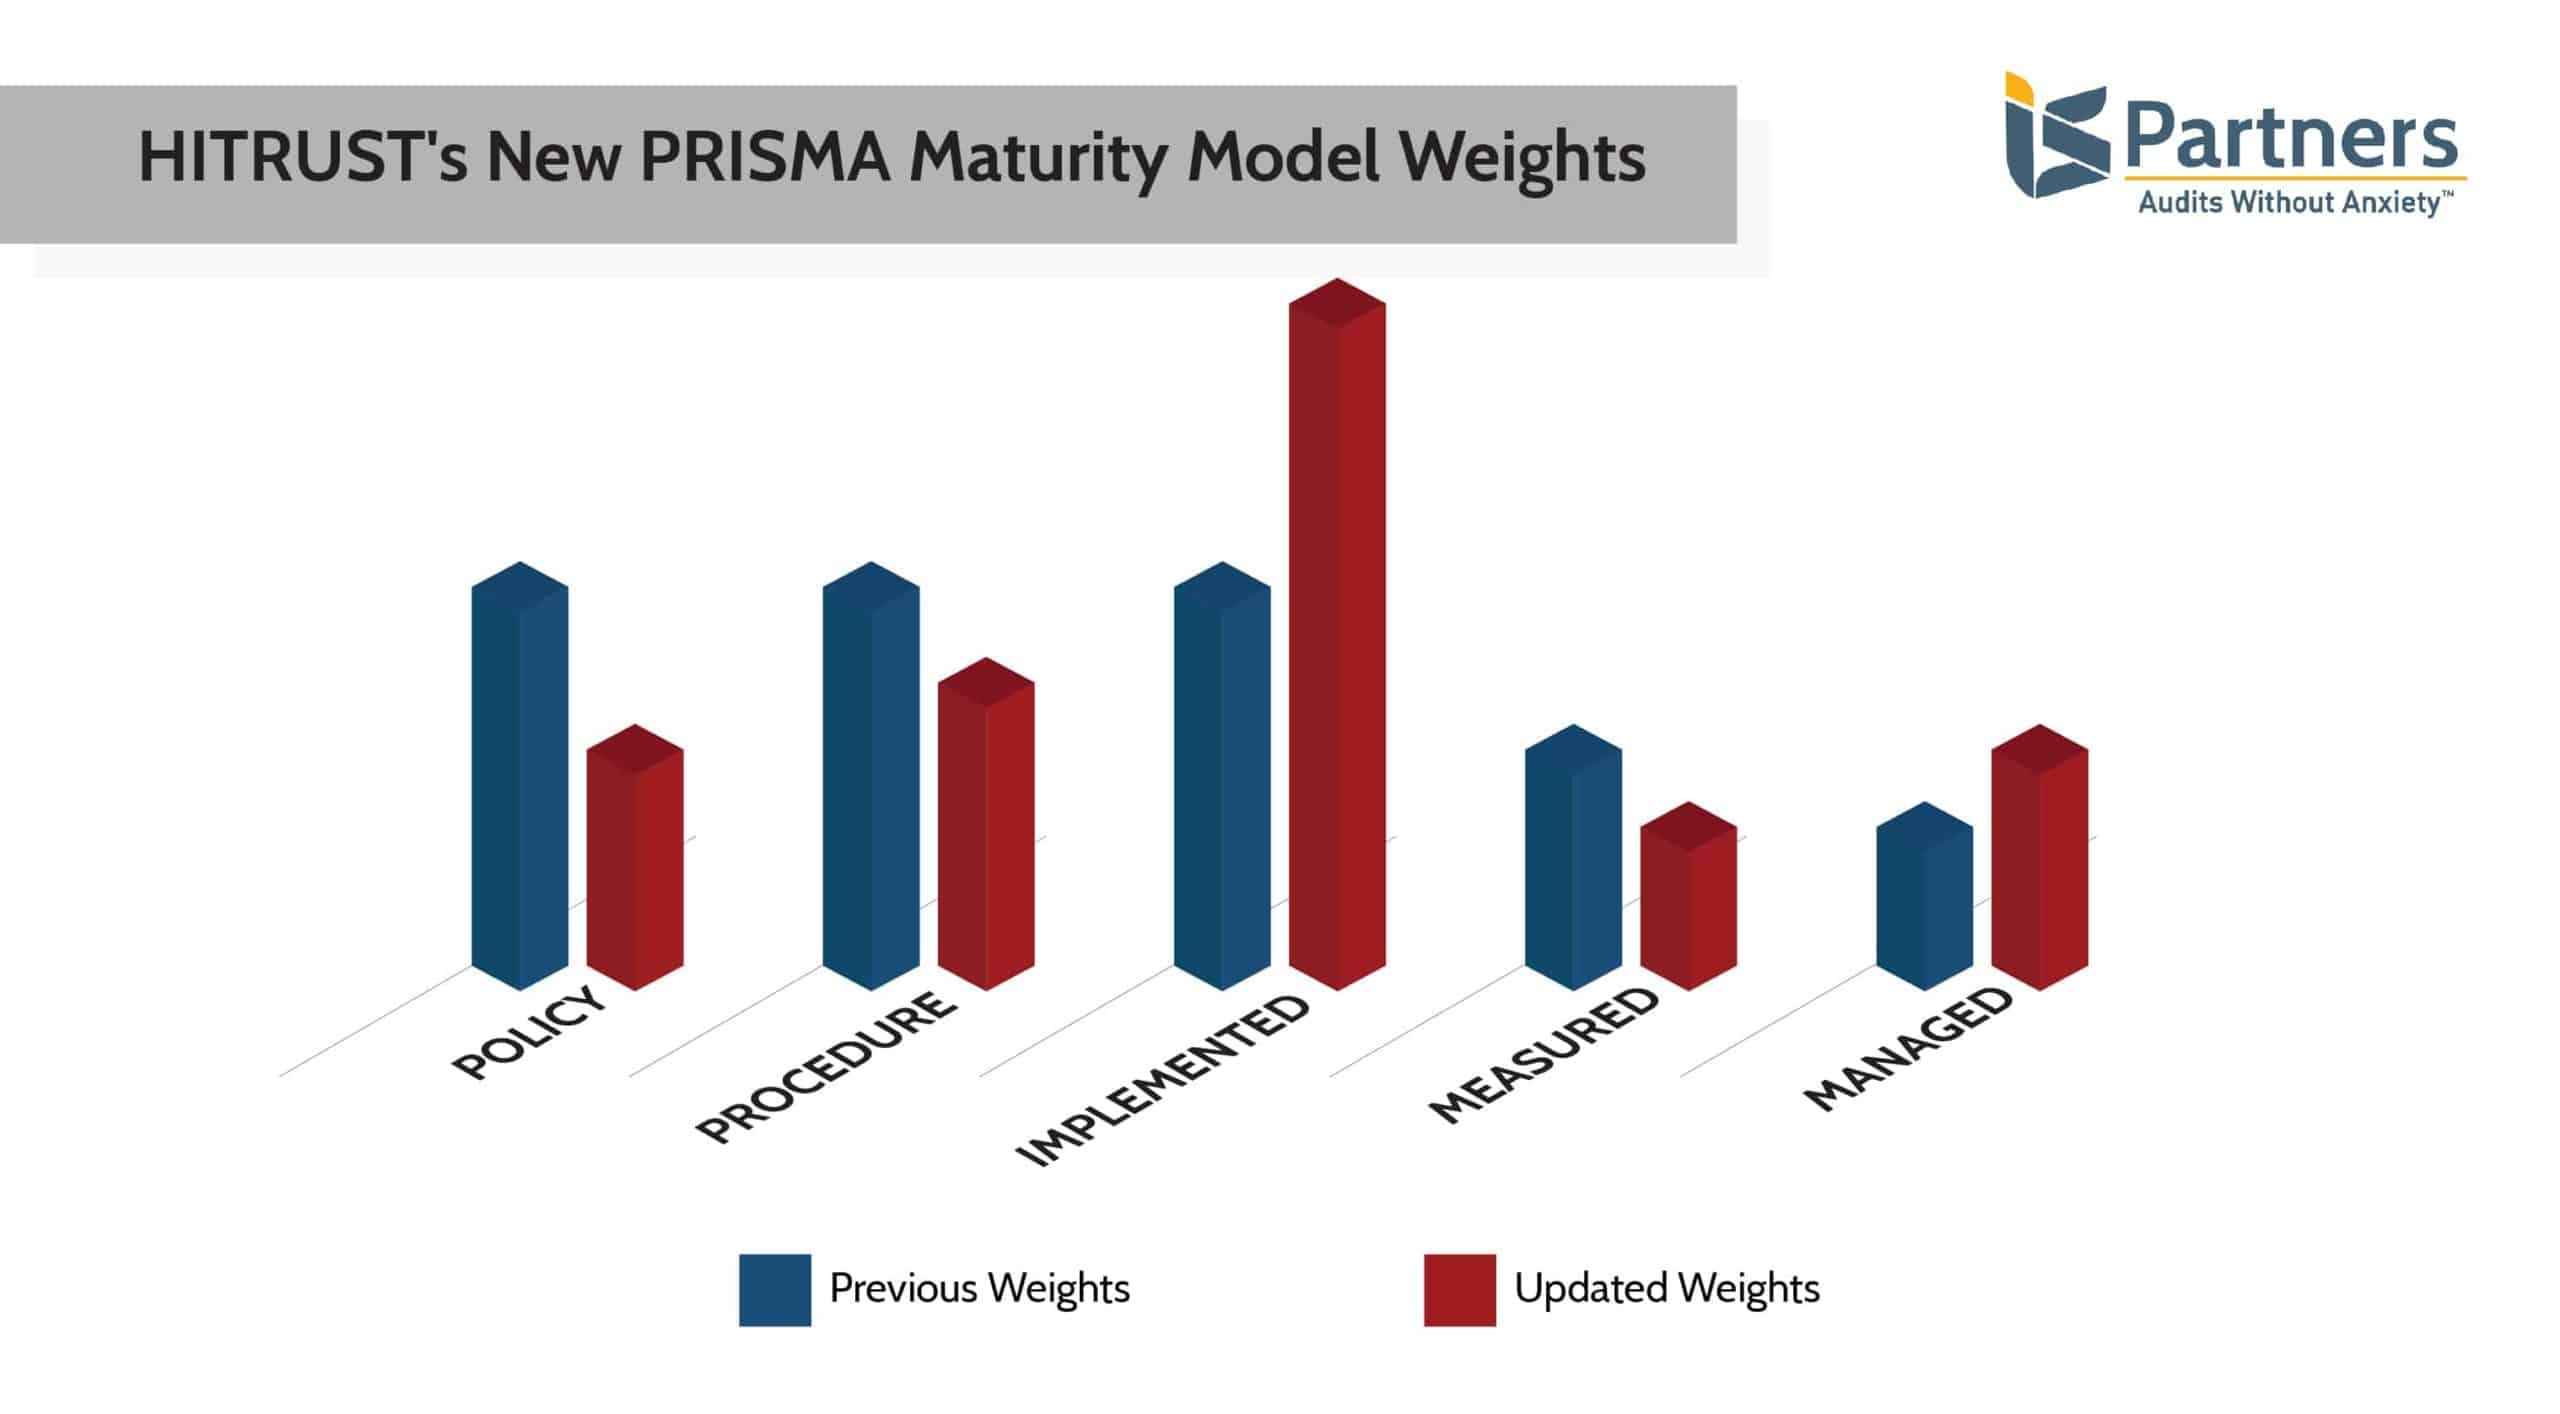 bar graph showing the new HITRUST PRISMA Maturity Model Weights